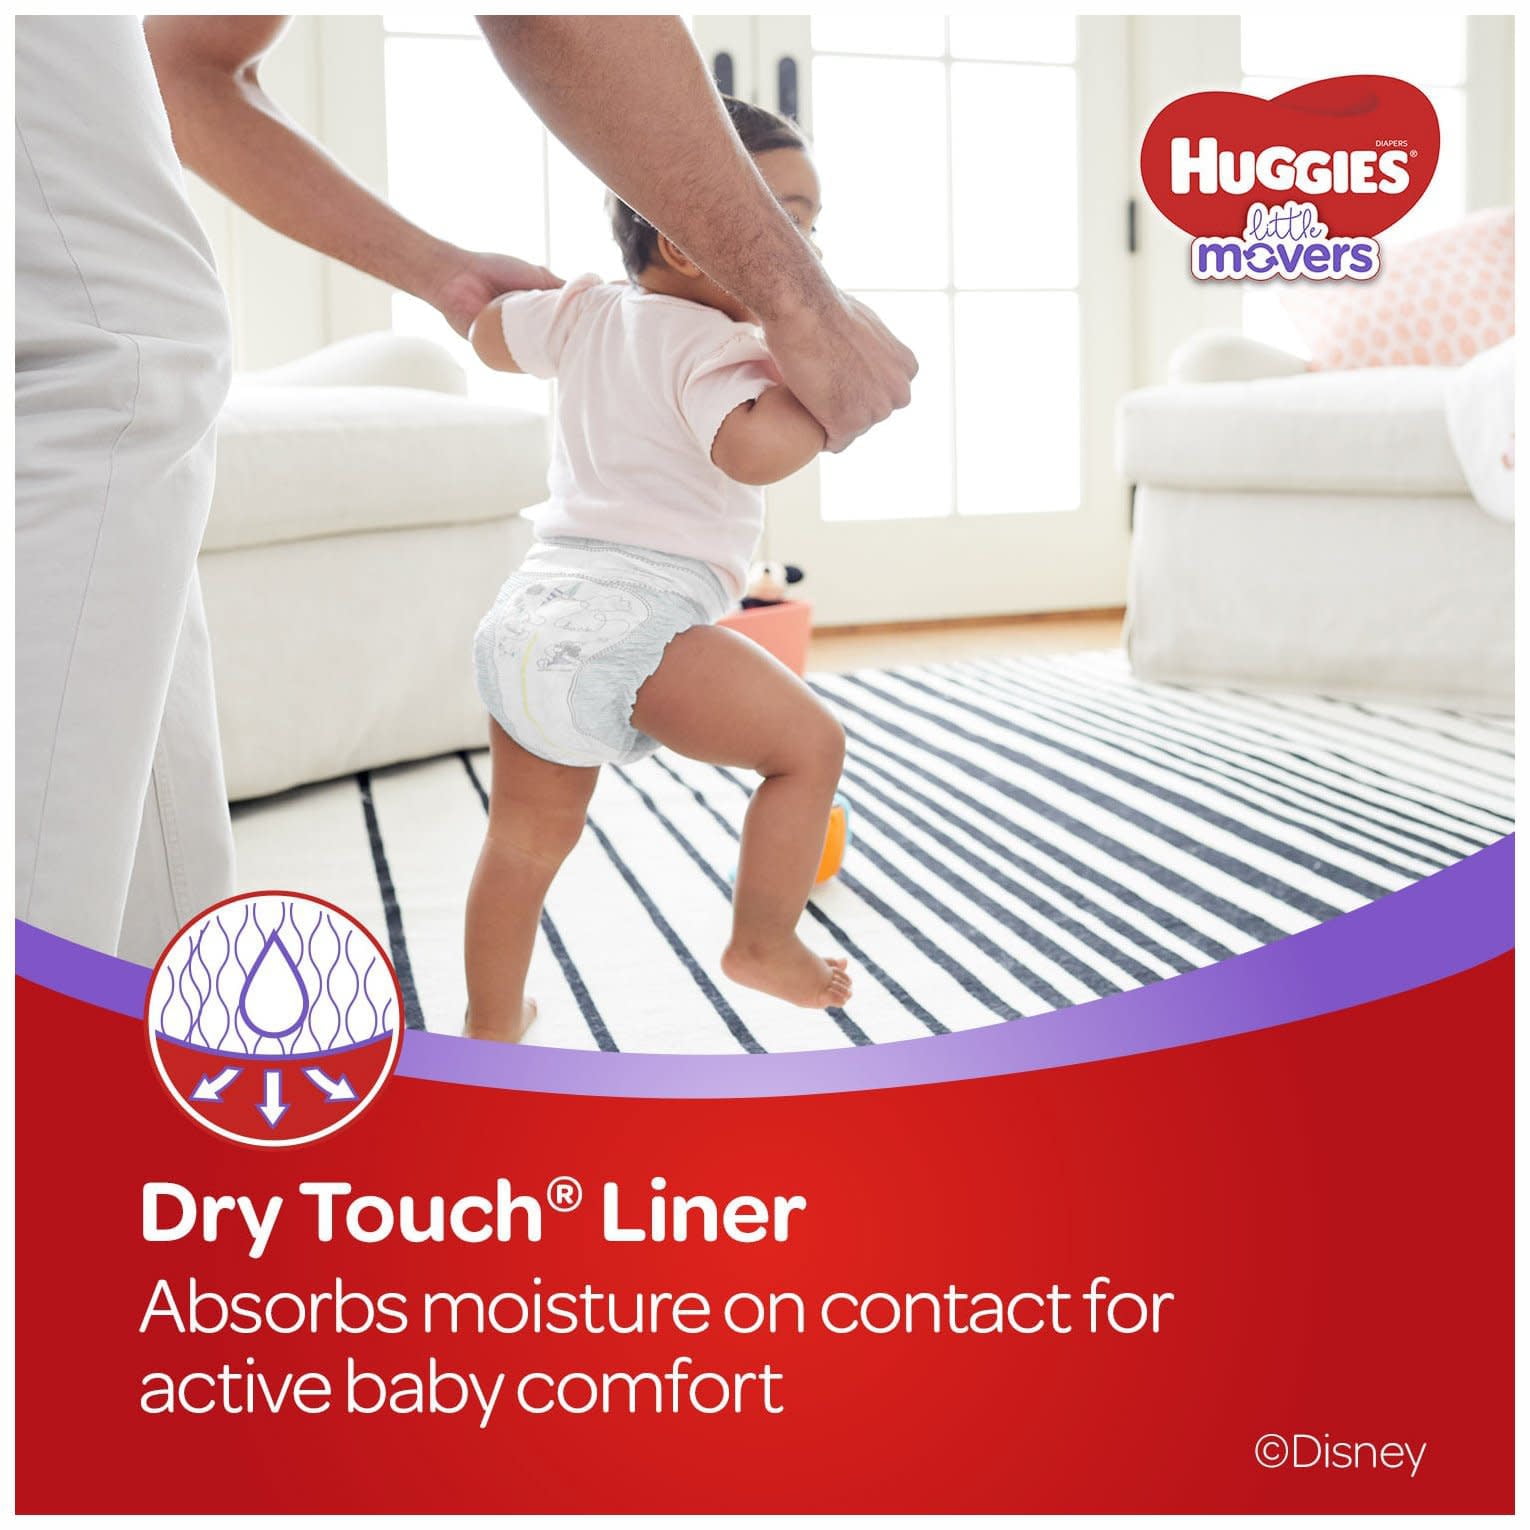 Huggies Ultra Comfort Nappies Size 6 (16-30 kg), Pack of 88 Nappies :  : Baby Products